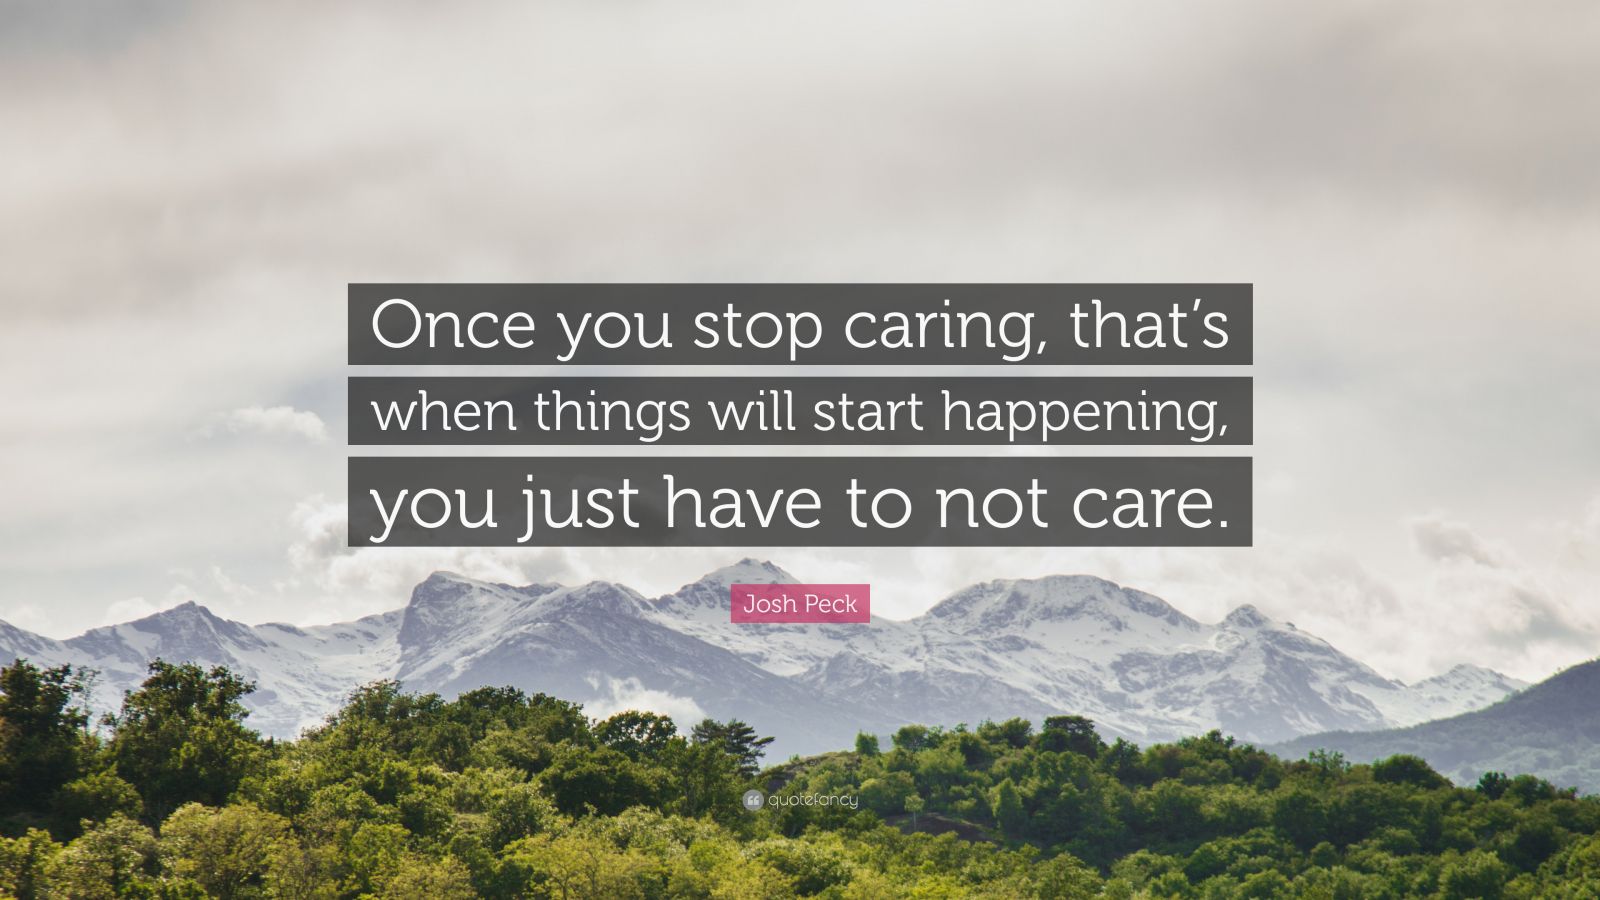 Josh Peck Quote: “Once you stop caring, that’s when things will start ...